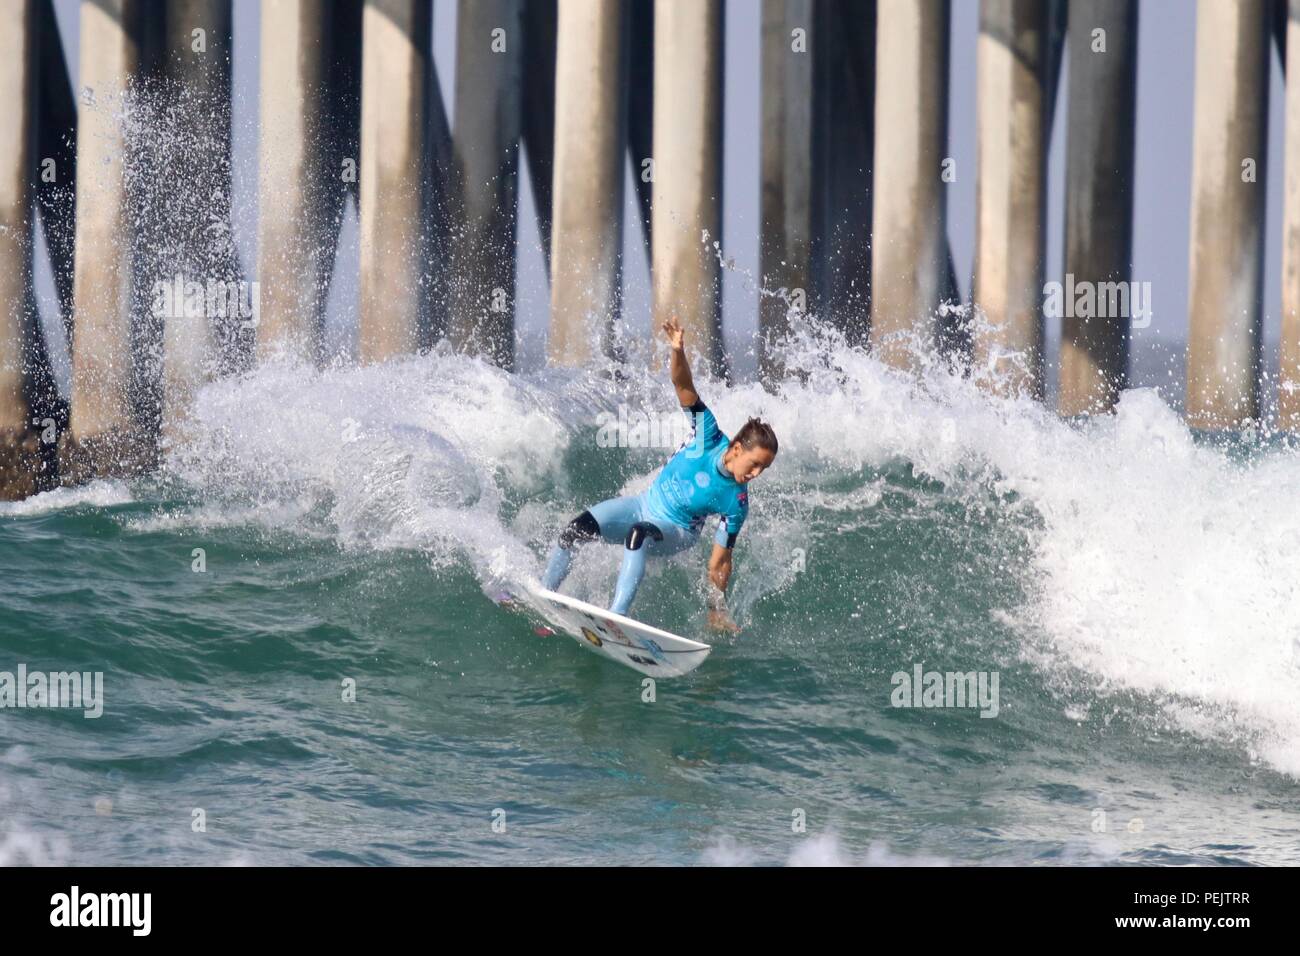 Sally Fitzgibbons competere nel US Open di surf 2018 Foto Stock